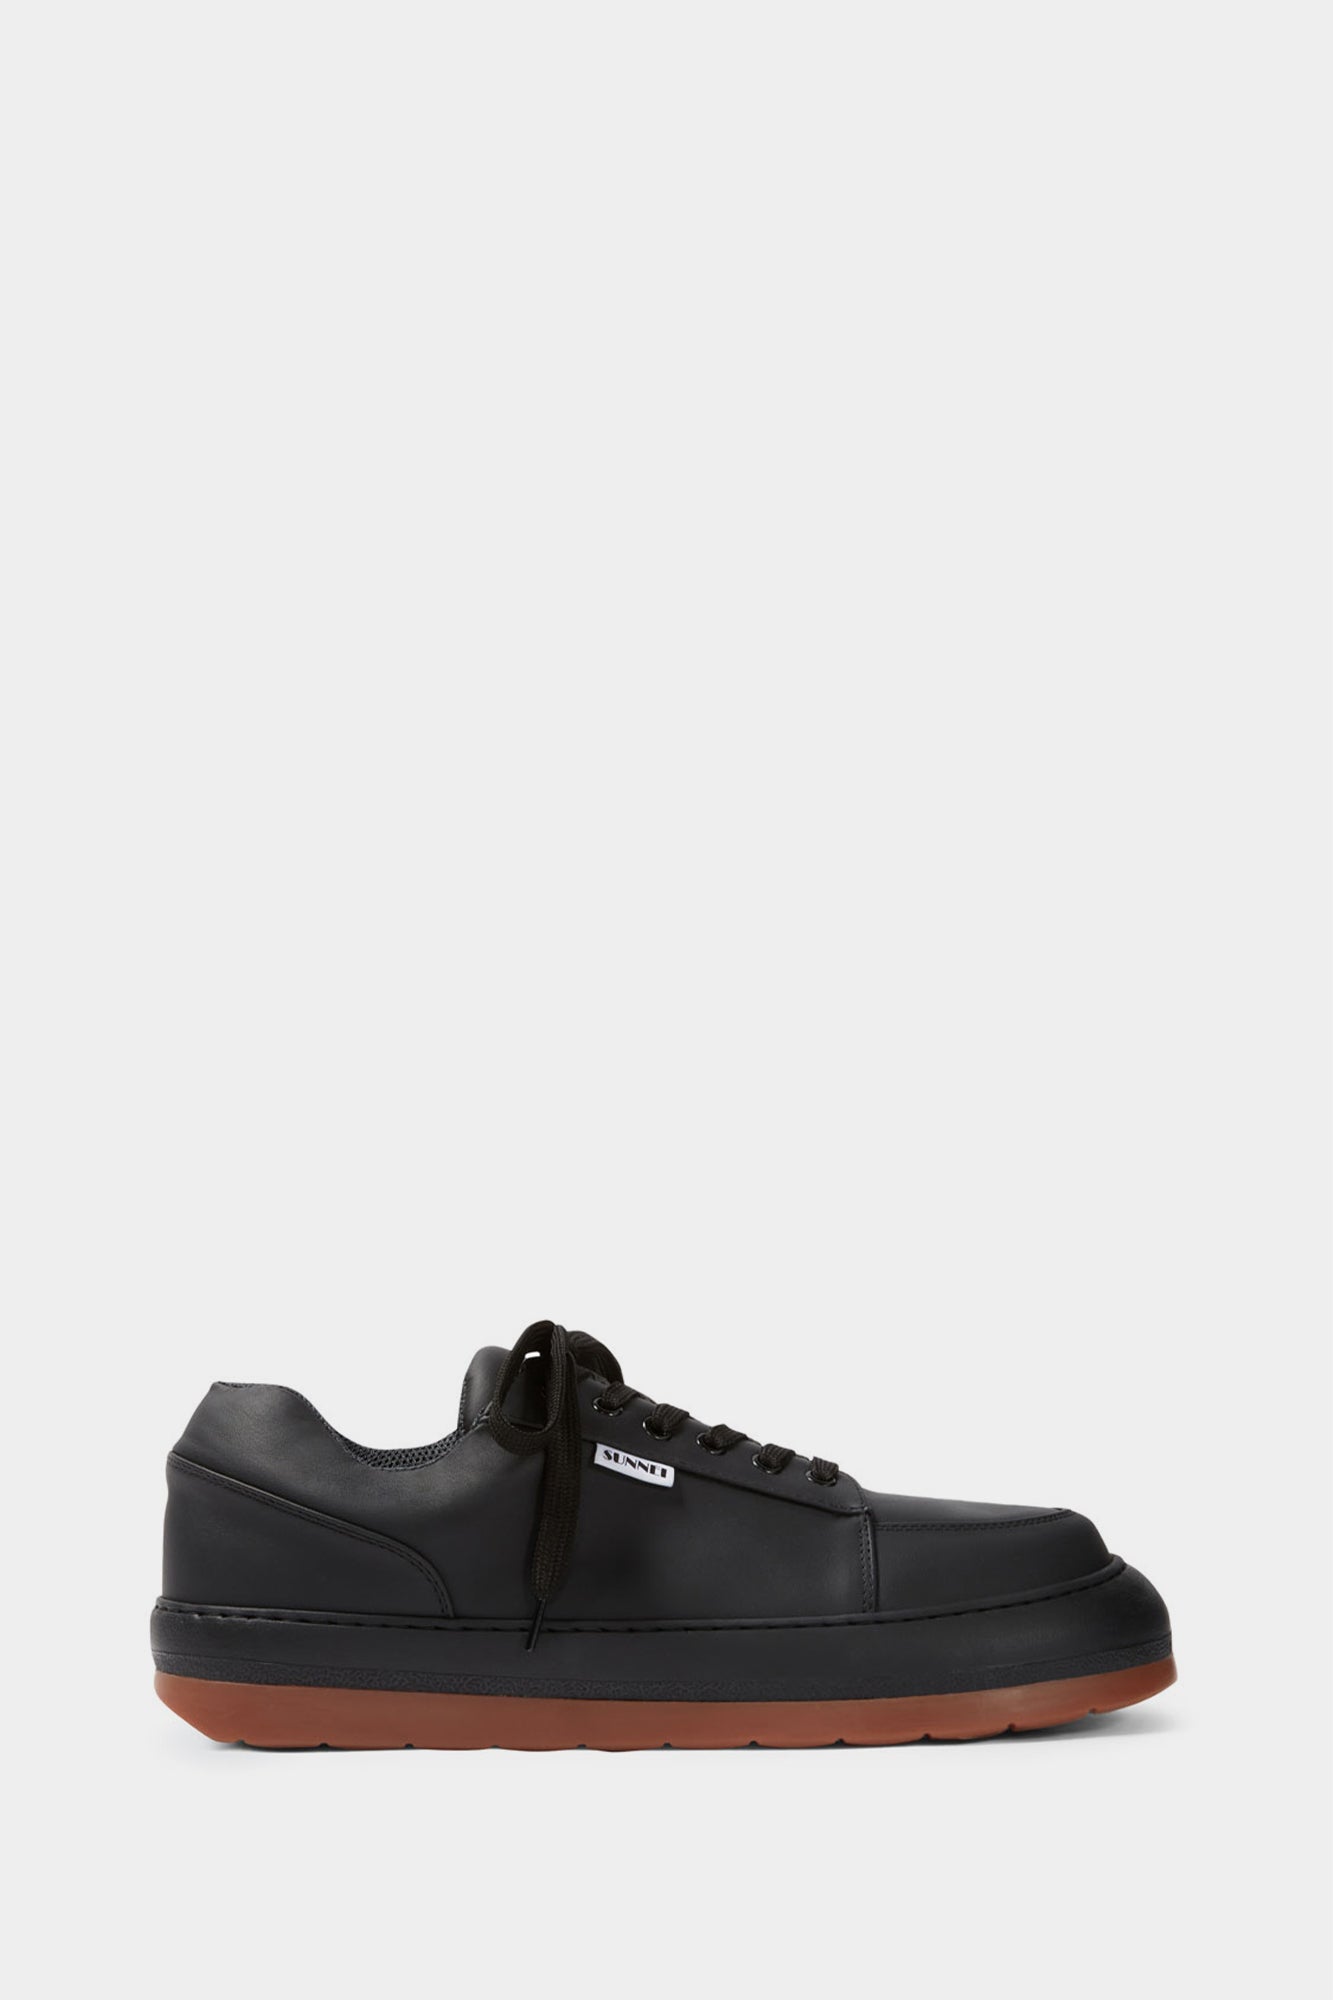 DREAMY SHOES / leather / black